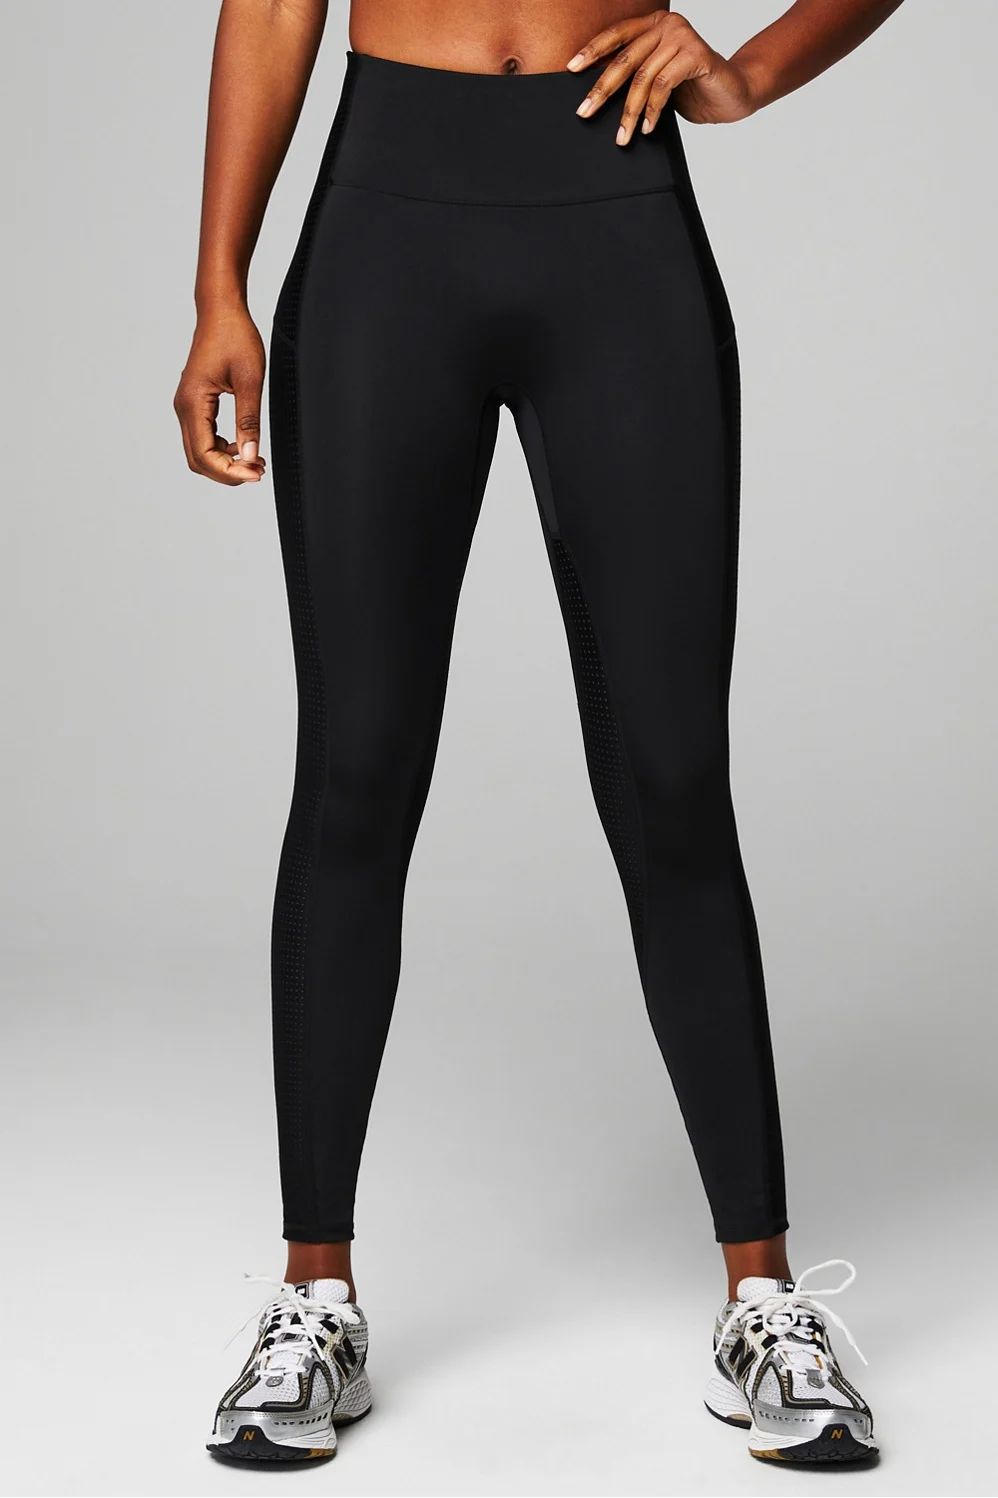 Motion365+ High-Waisted Legging | Fabletics - North America